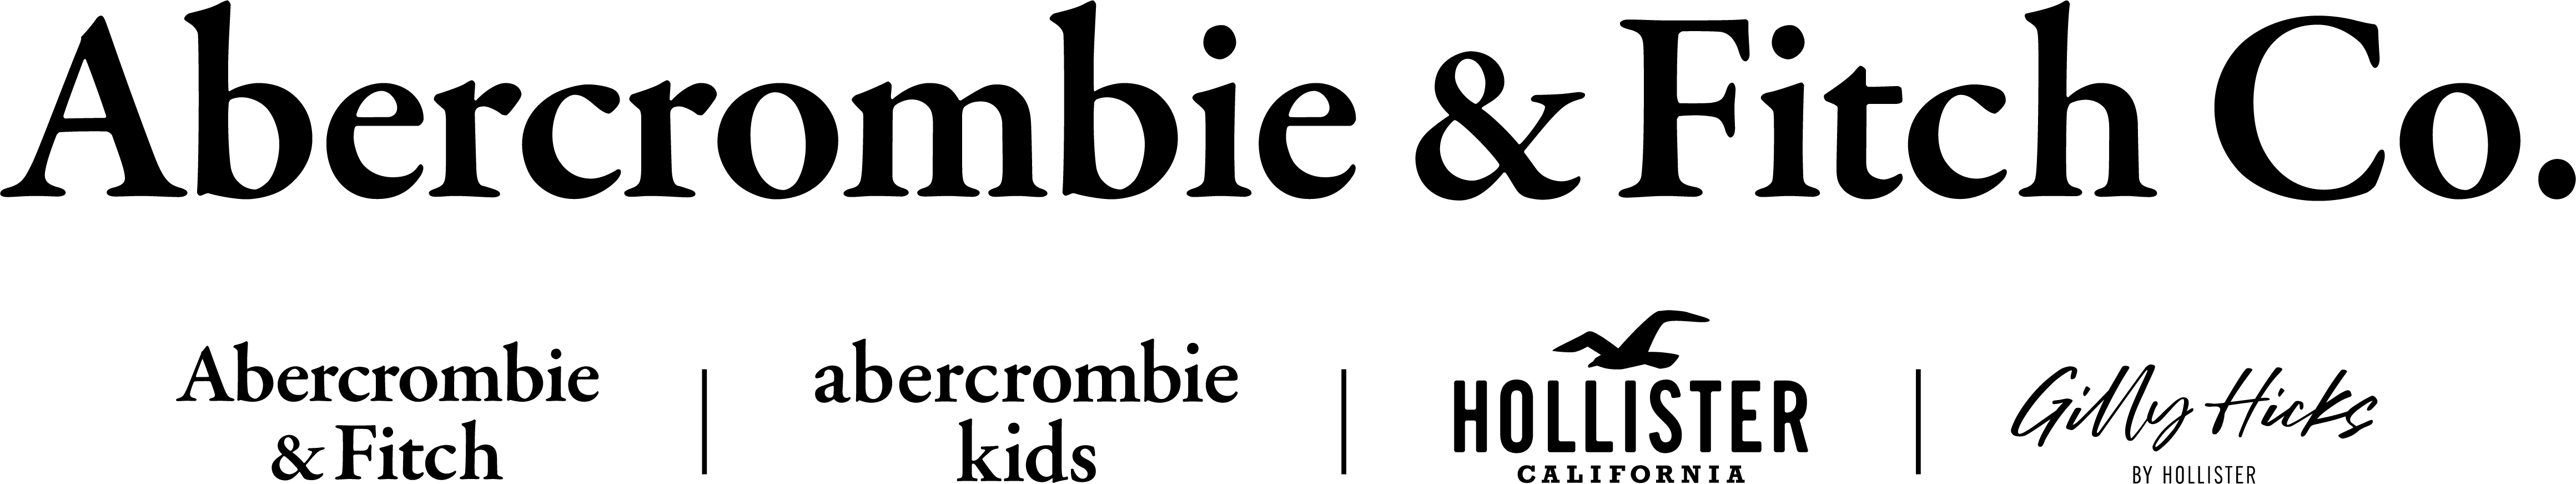 Abercrombie & Fitch Launches New Miniseries Focused on